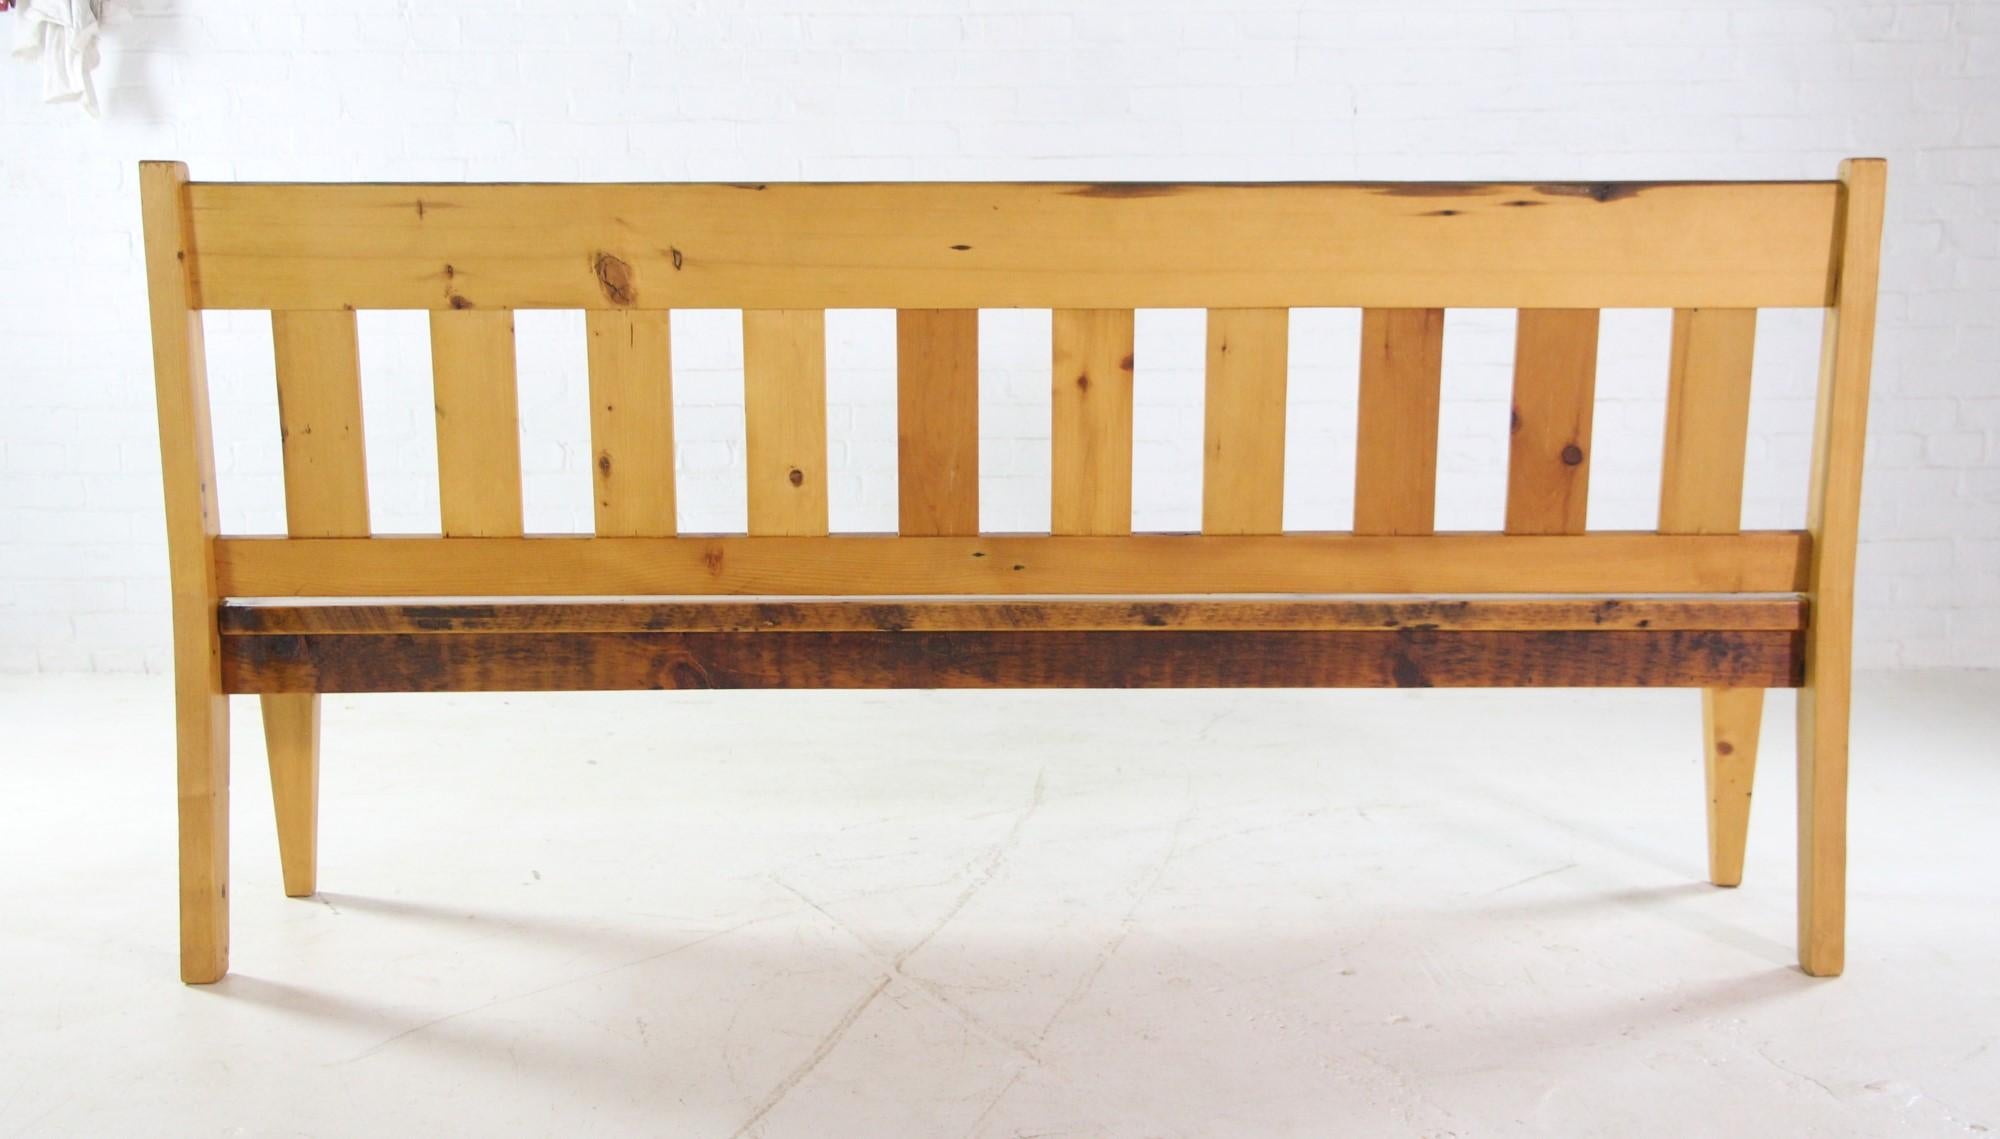 Contemporary 7 Ft Slatted Wood Bench with Reclaimed Pine Beams and Natural Stain